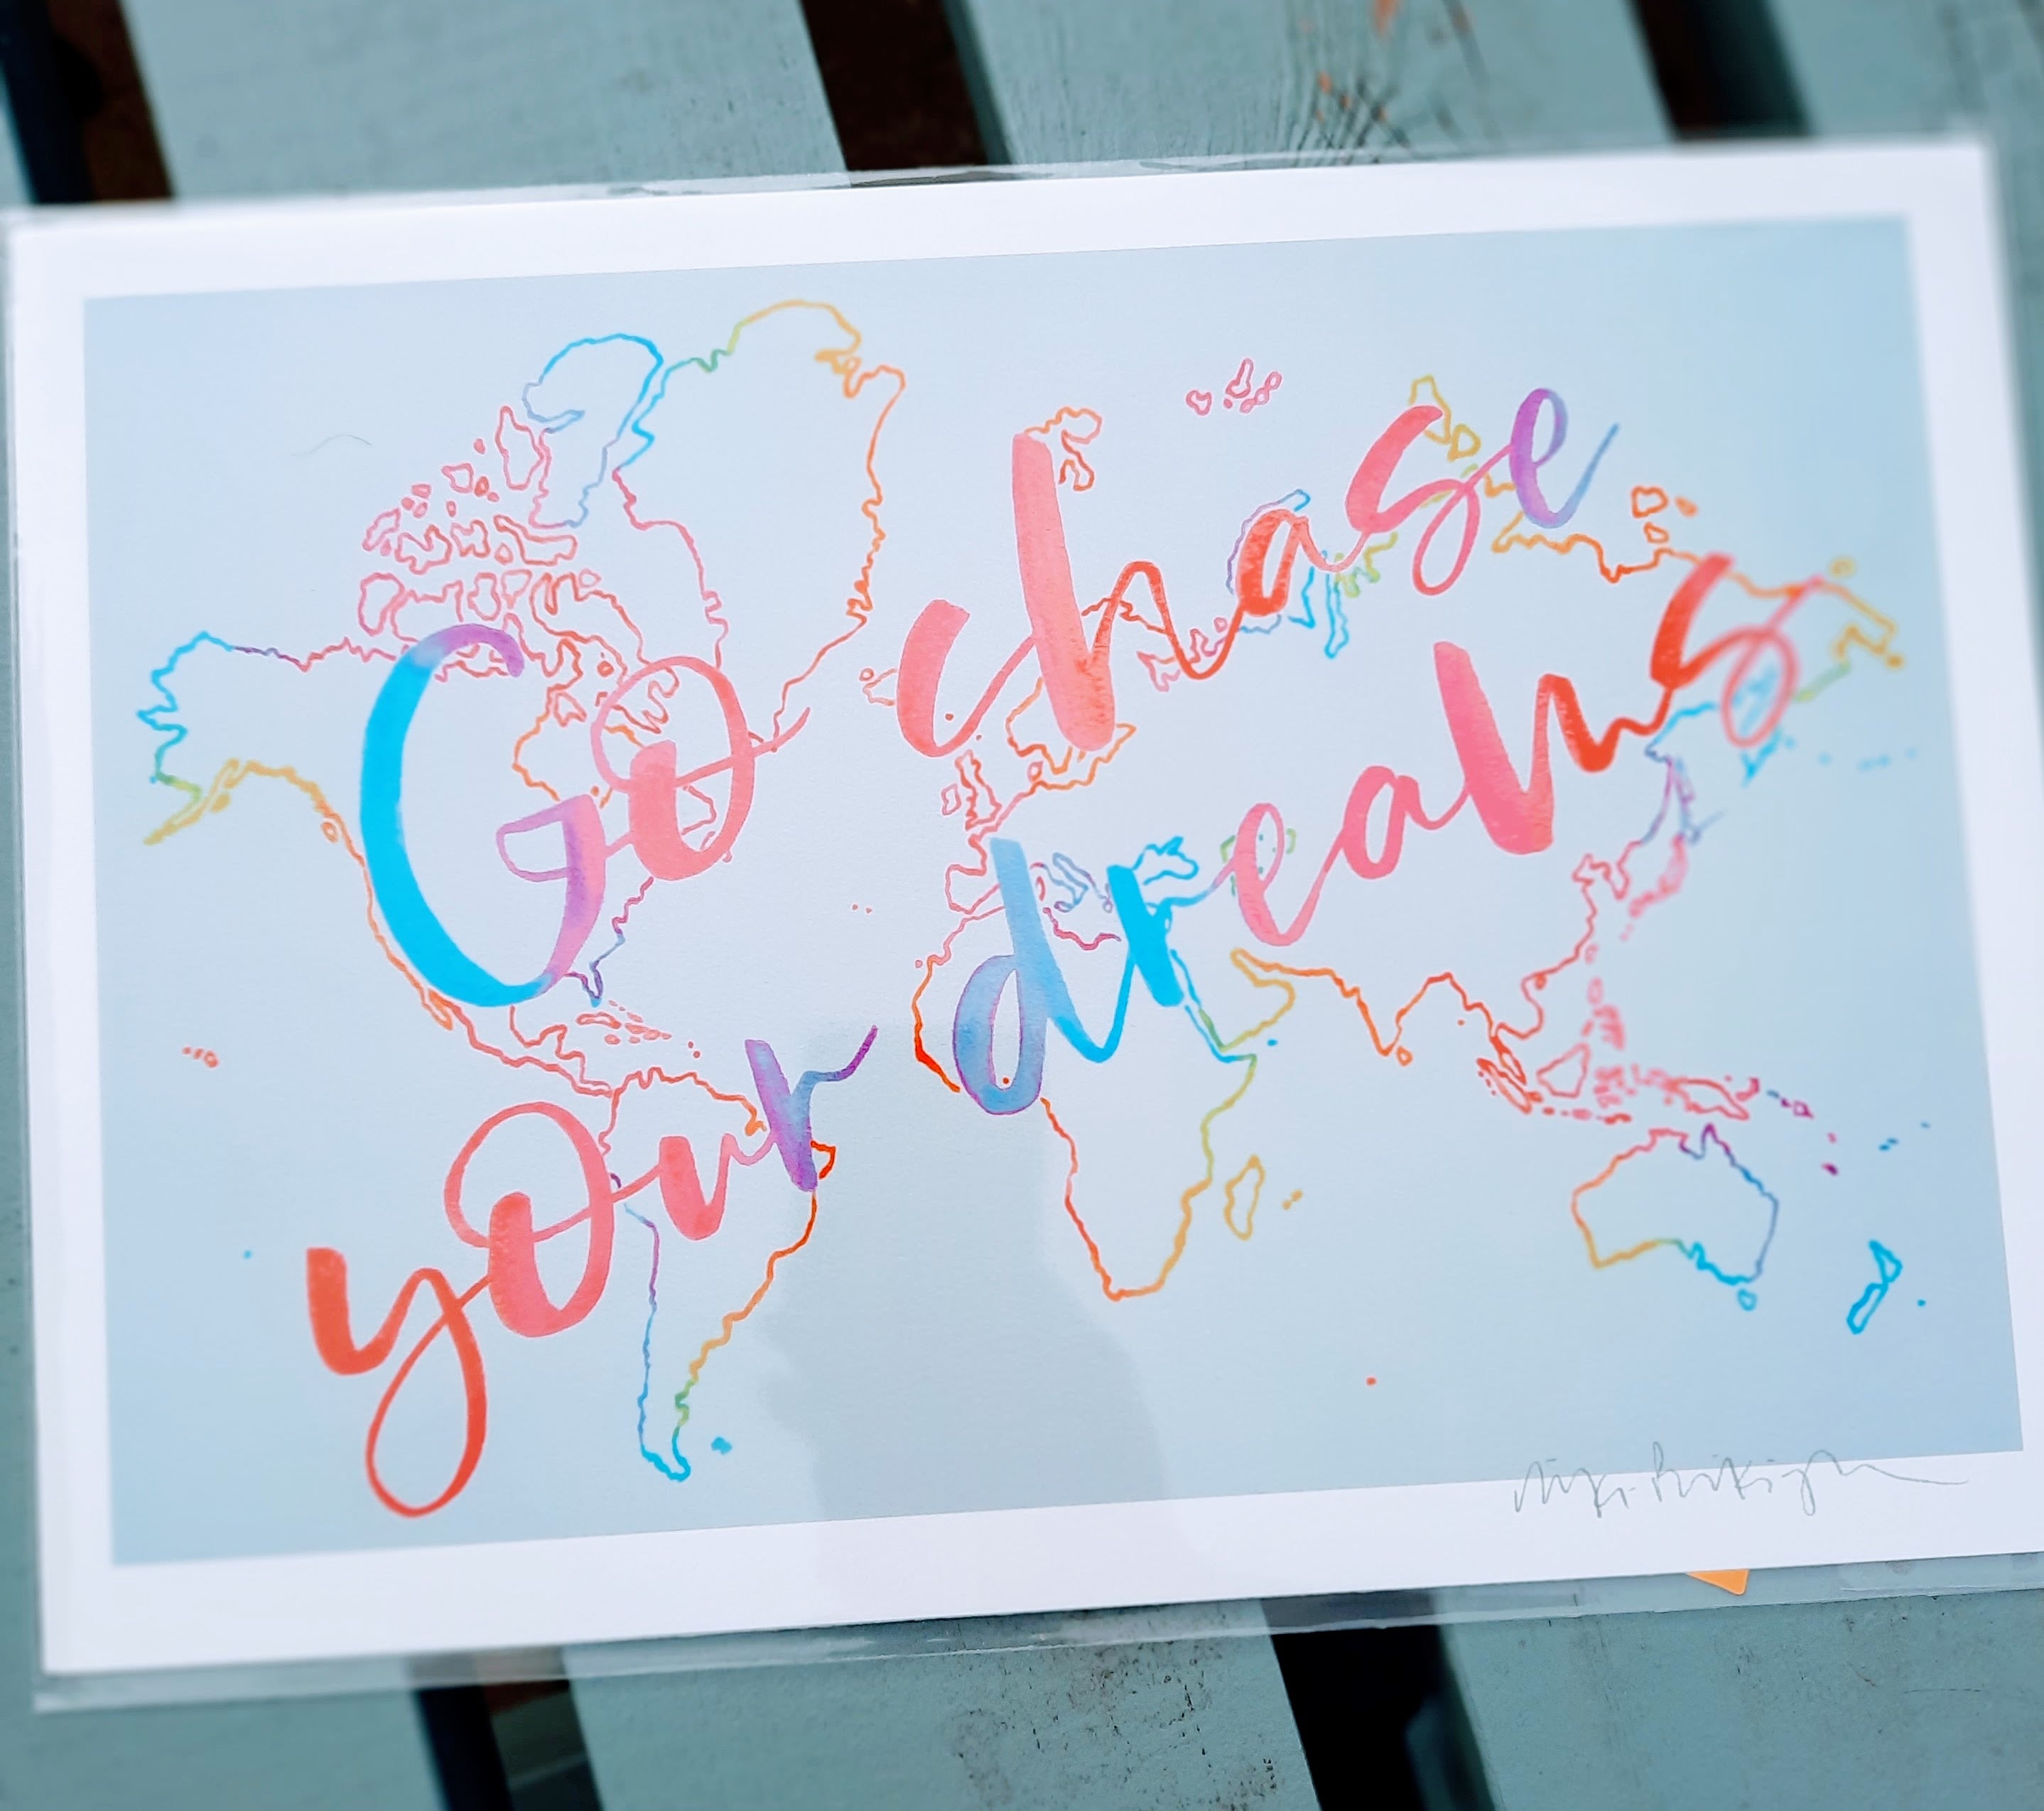 Go chase your dreams - A4 Print - Luvit!